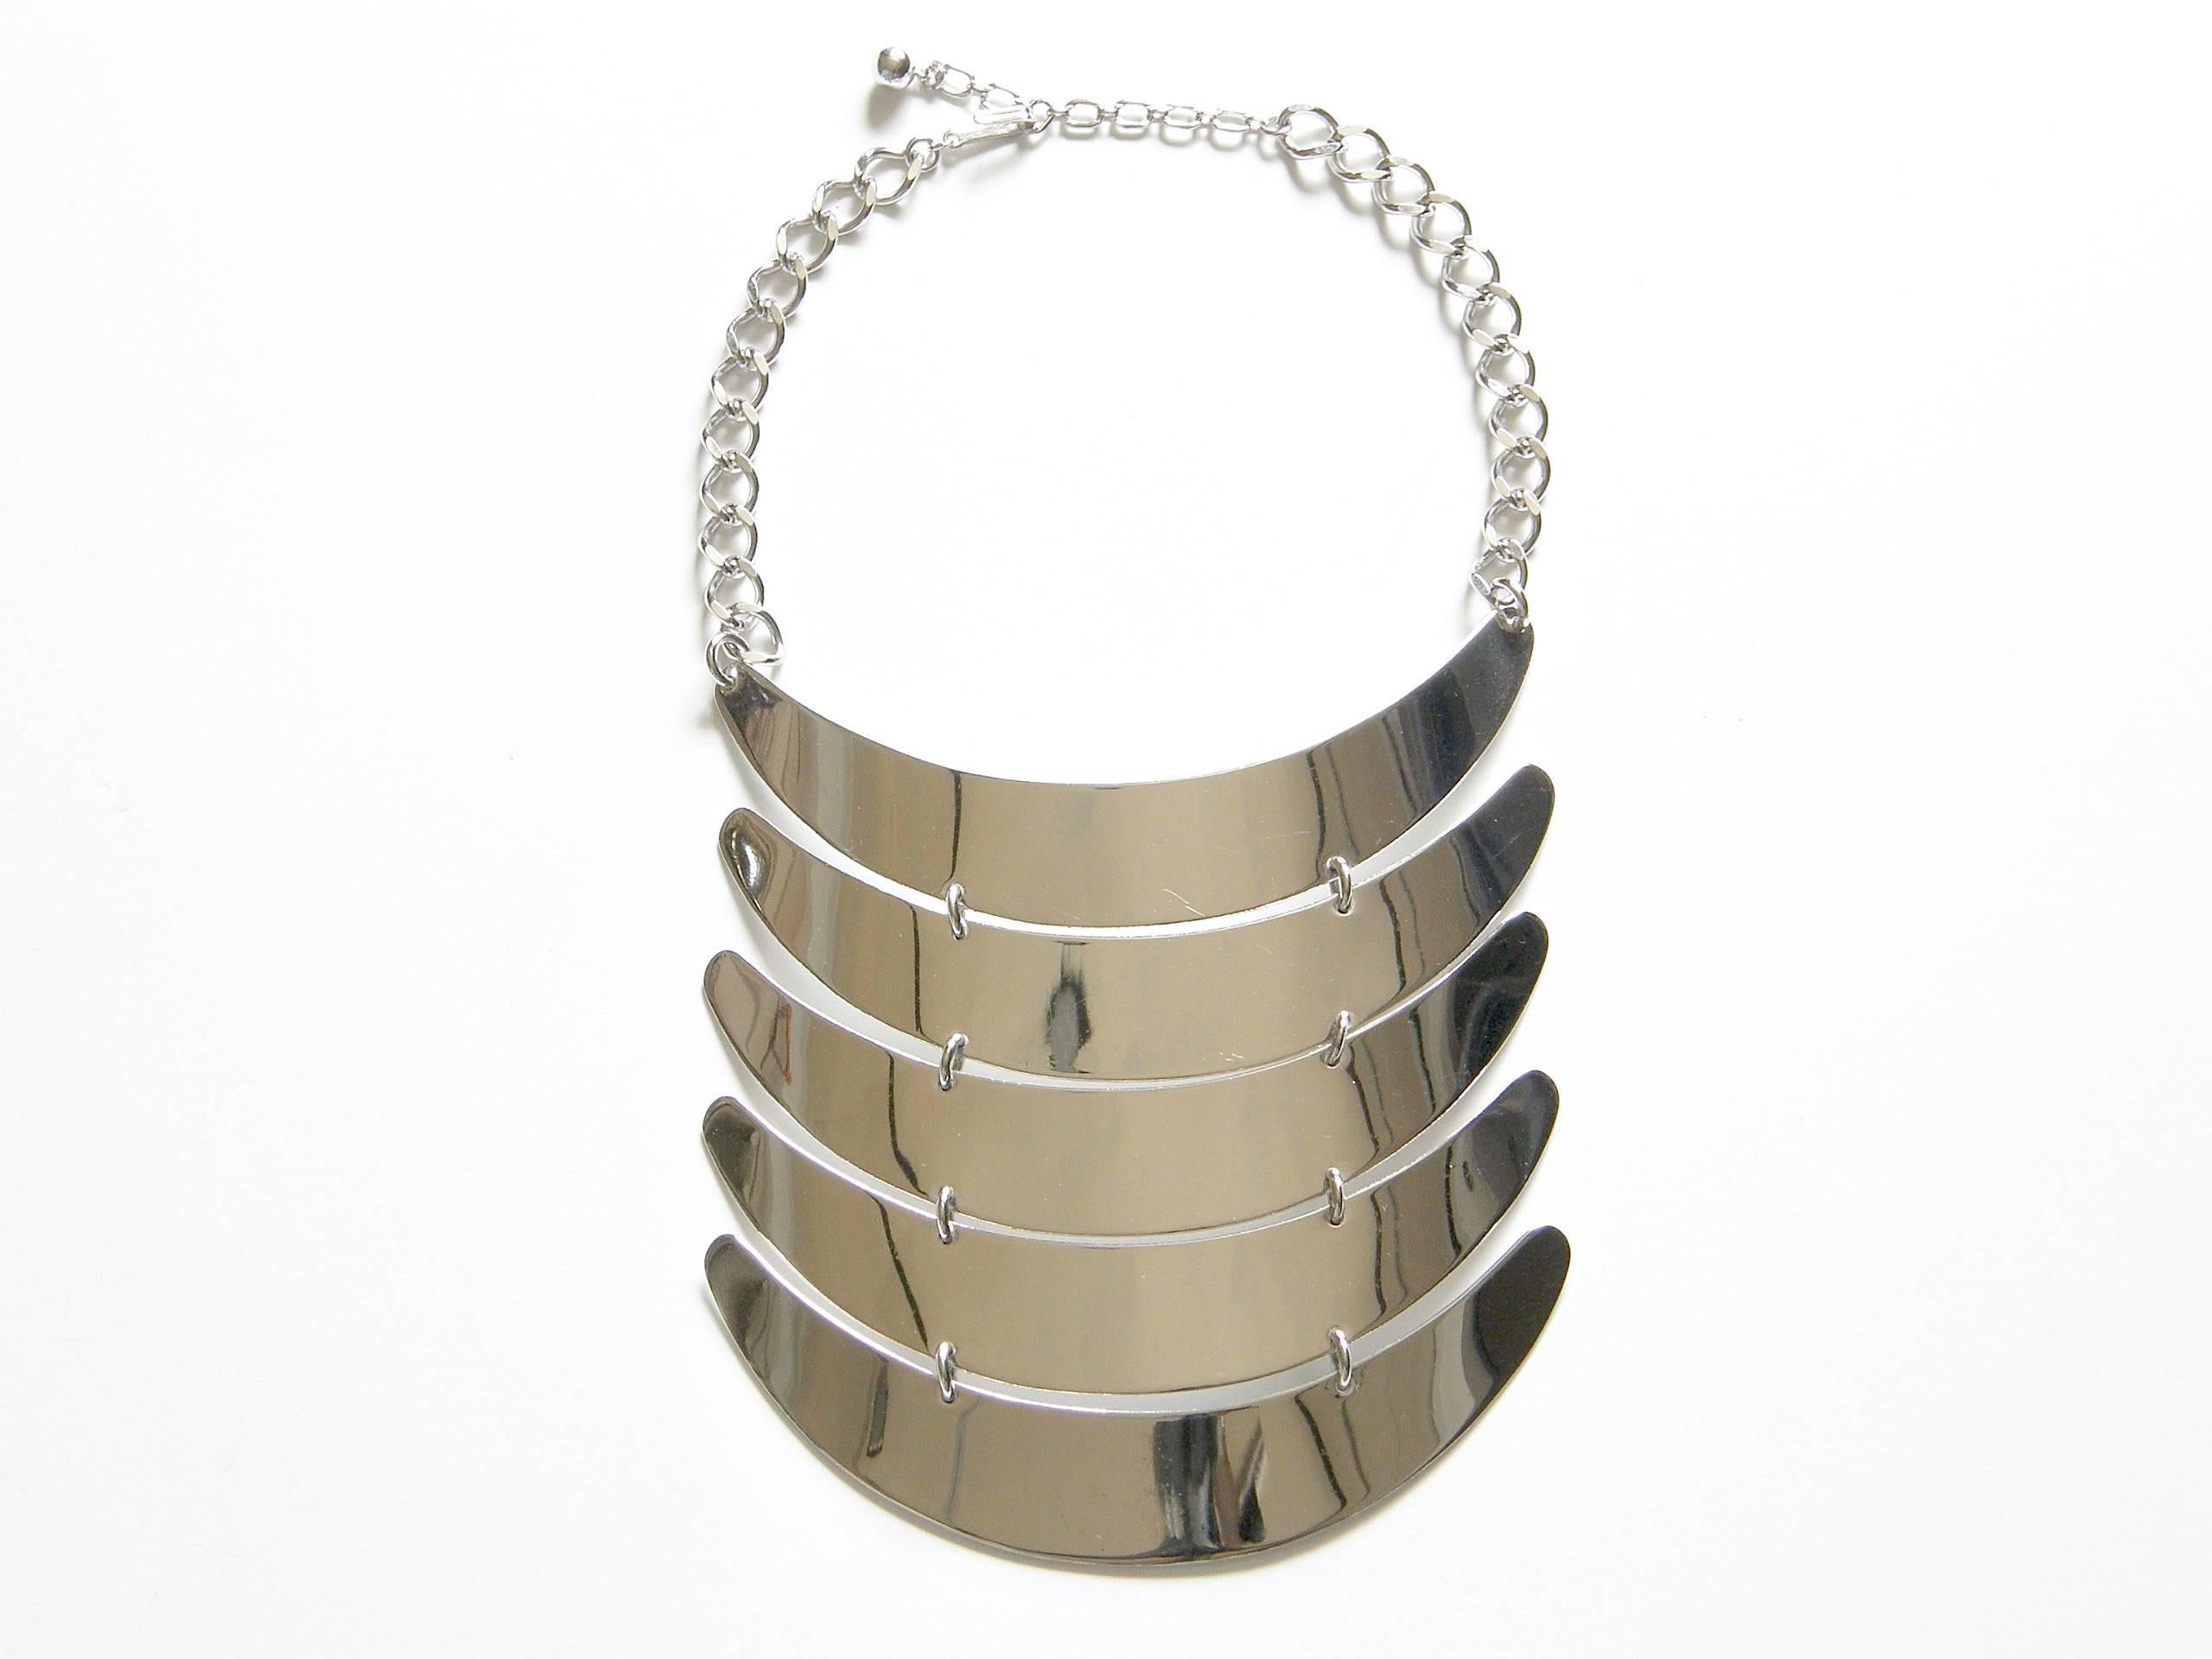 Women's Space Age Breastplate Necklace by Trifari 